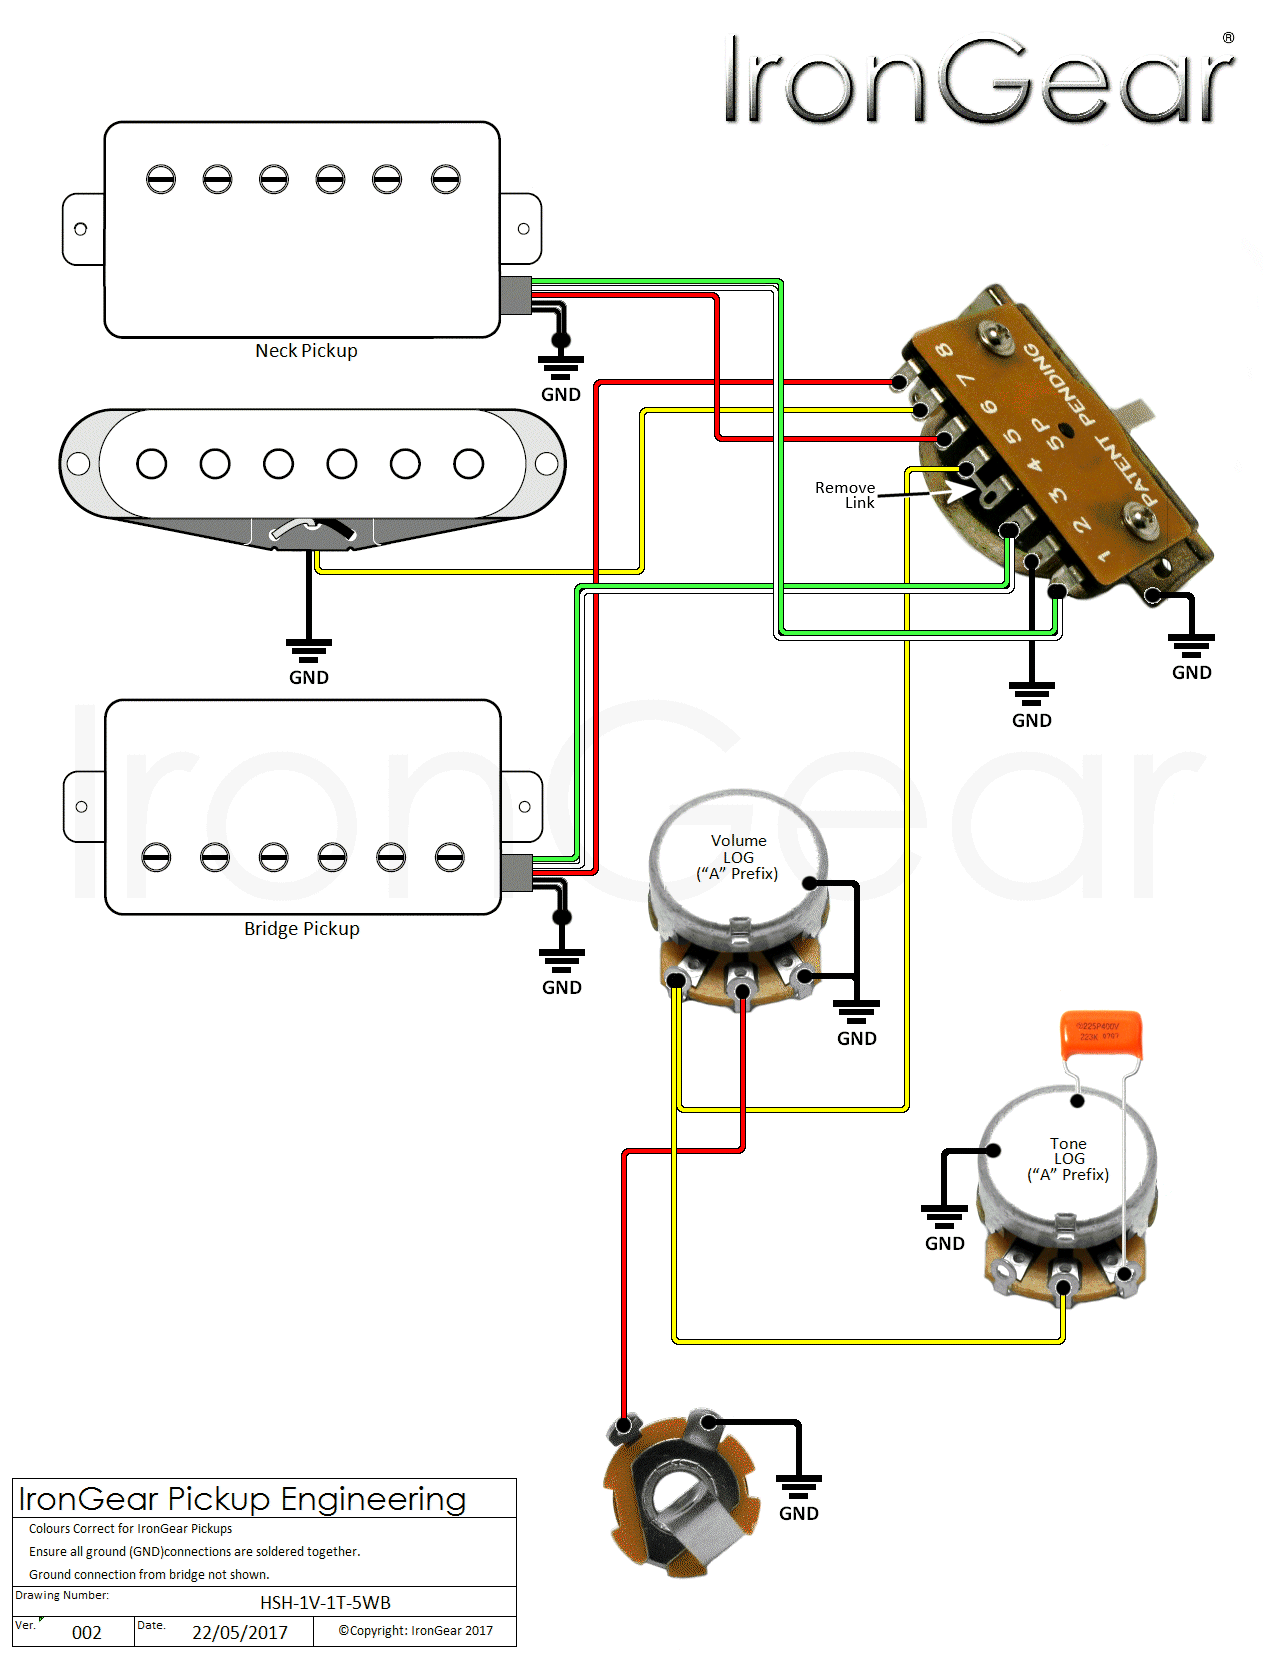 Telecaster 5 Way Wiring Diagram from www.irongear.co.uk